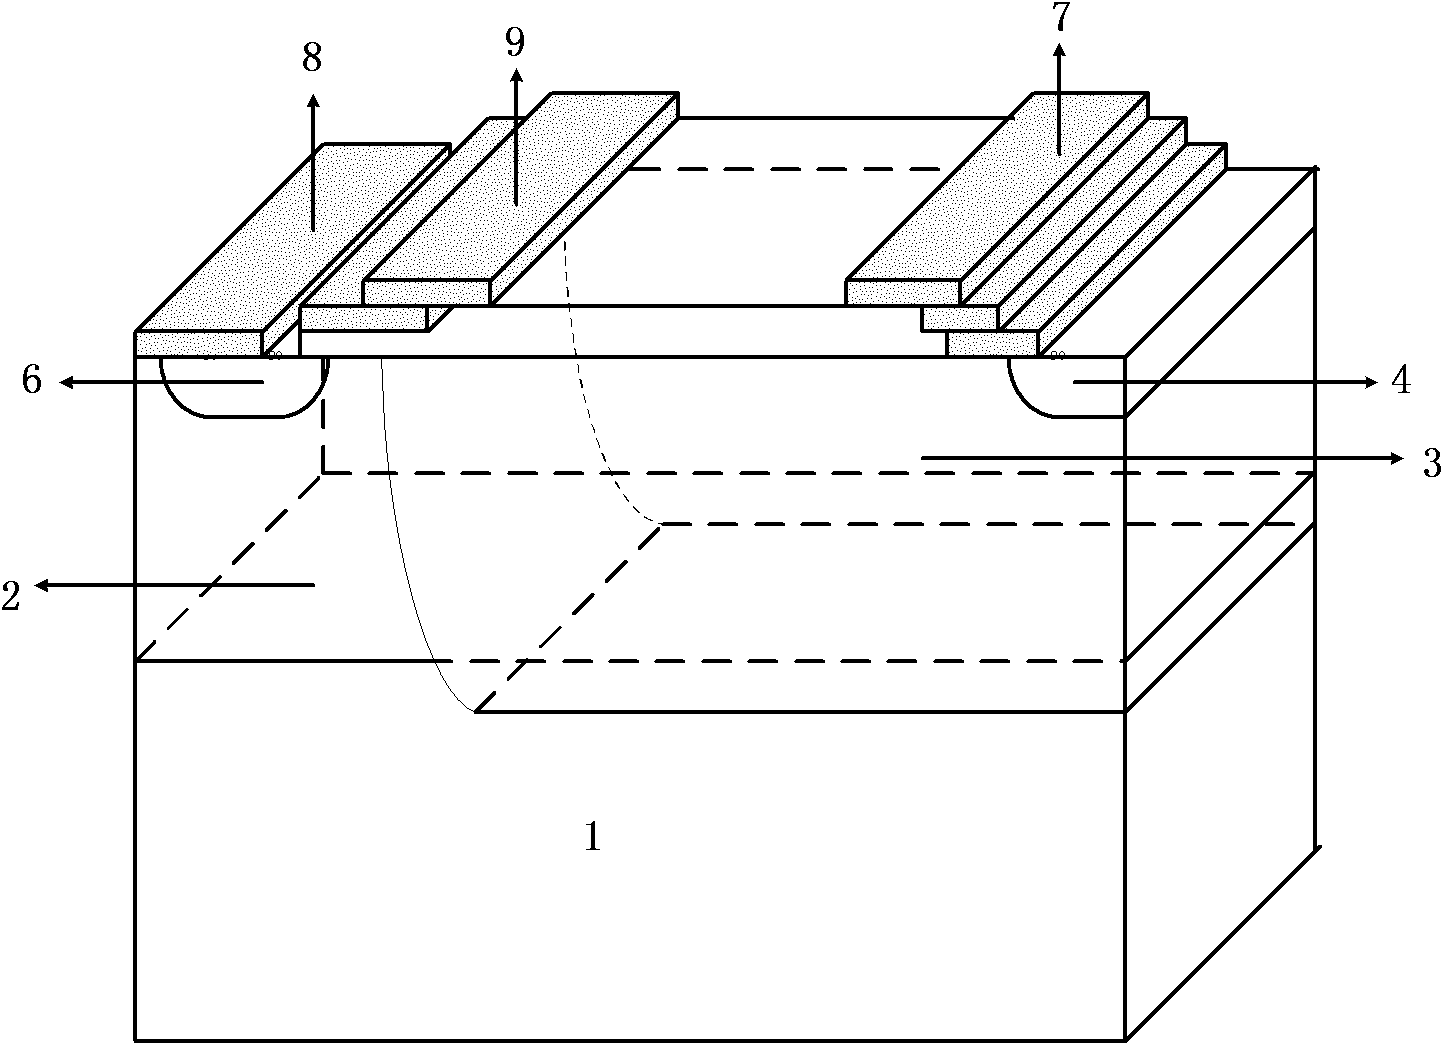 High-voltage LDMOS (landscape diffusion metal oxide semiconductor) device